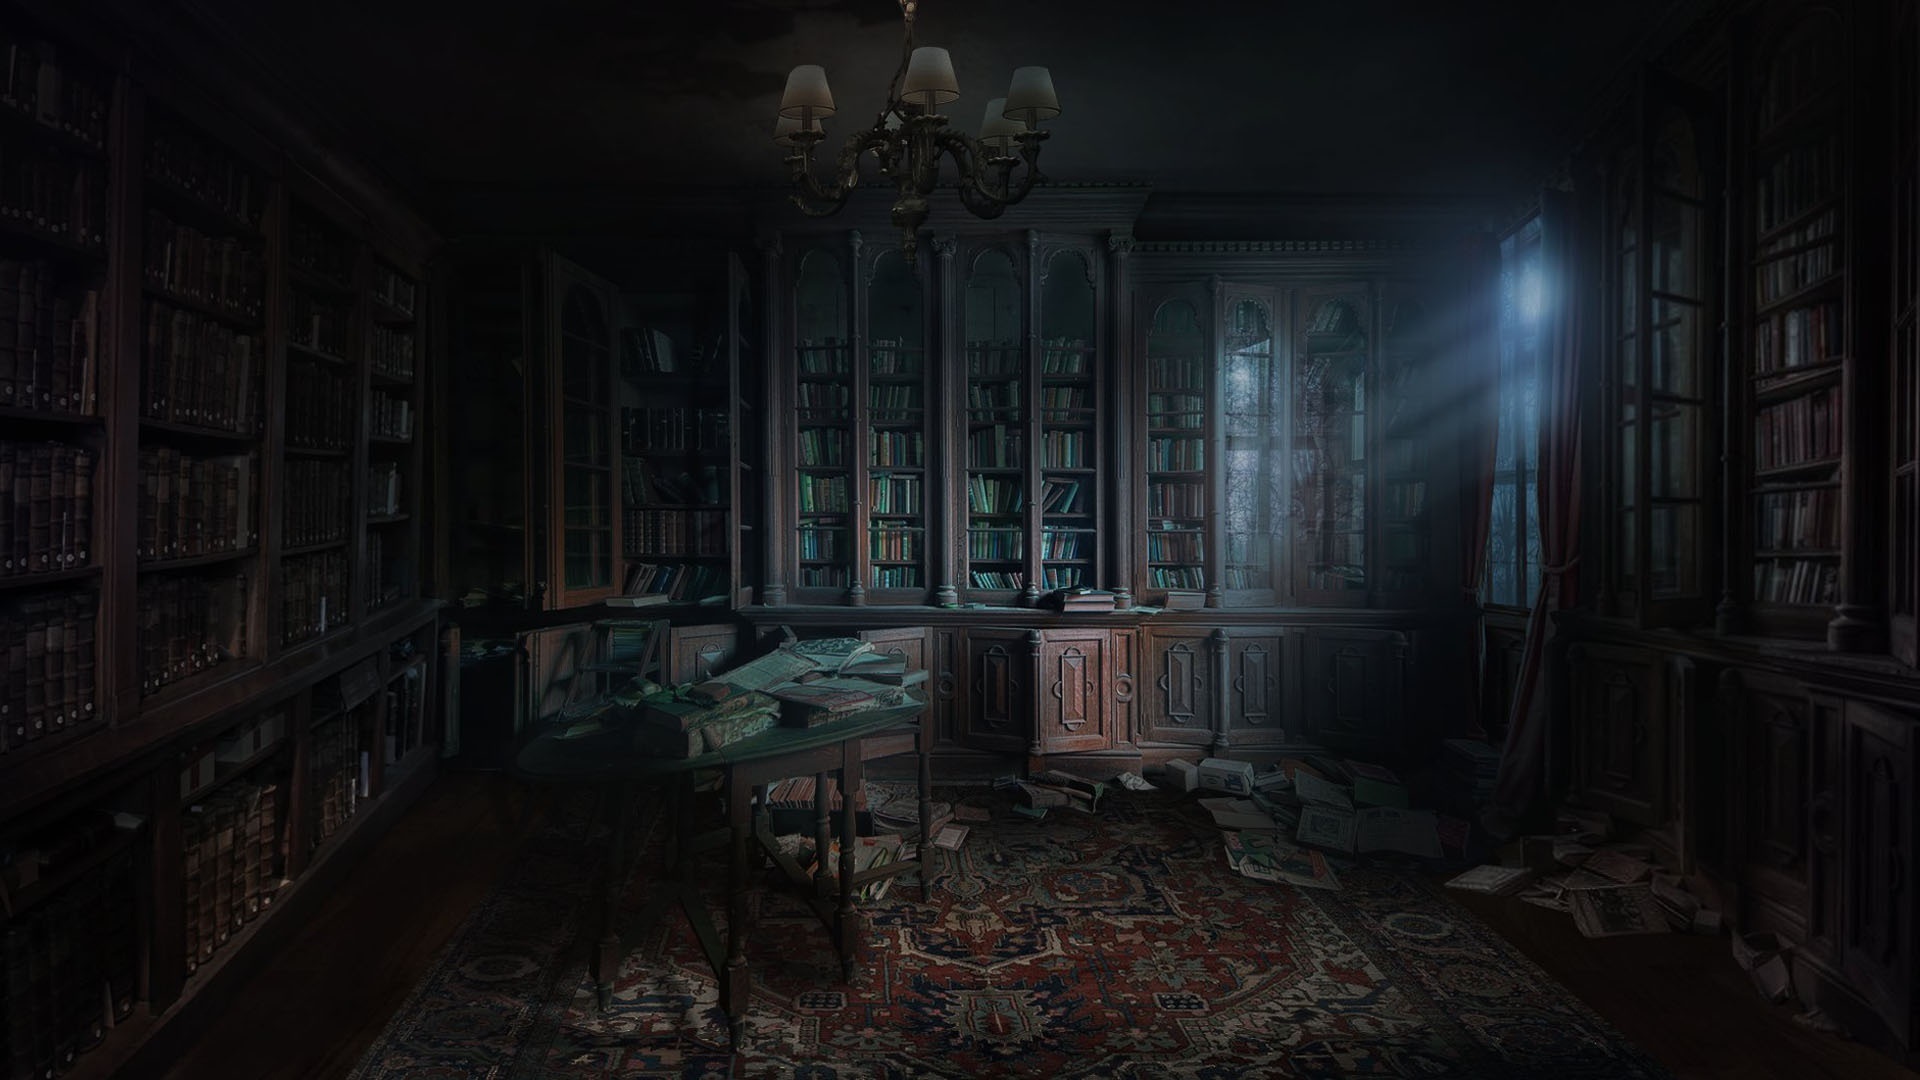 Wallpaper Library, books, window, light, darkness 1920x1080 Full HD 2K Picture, Image